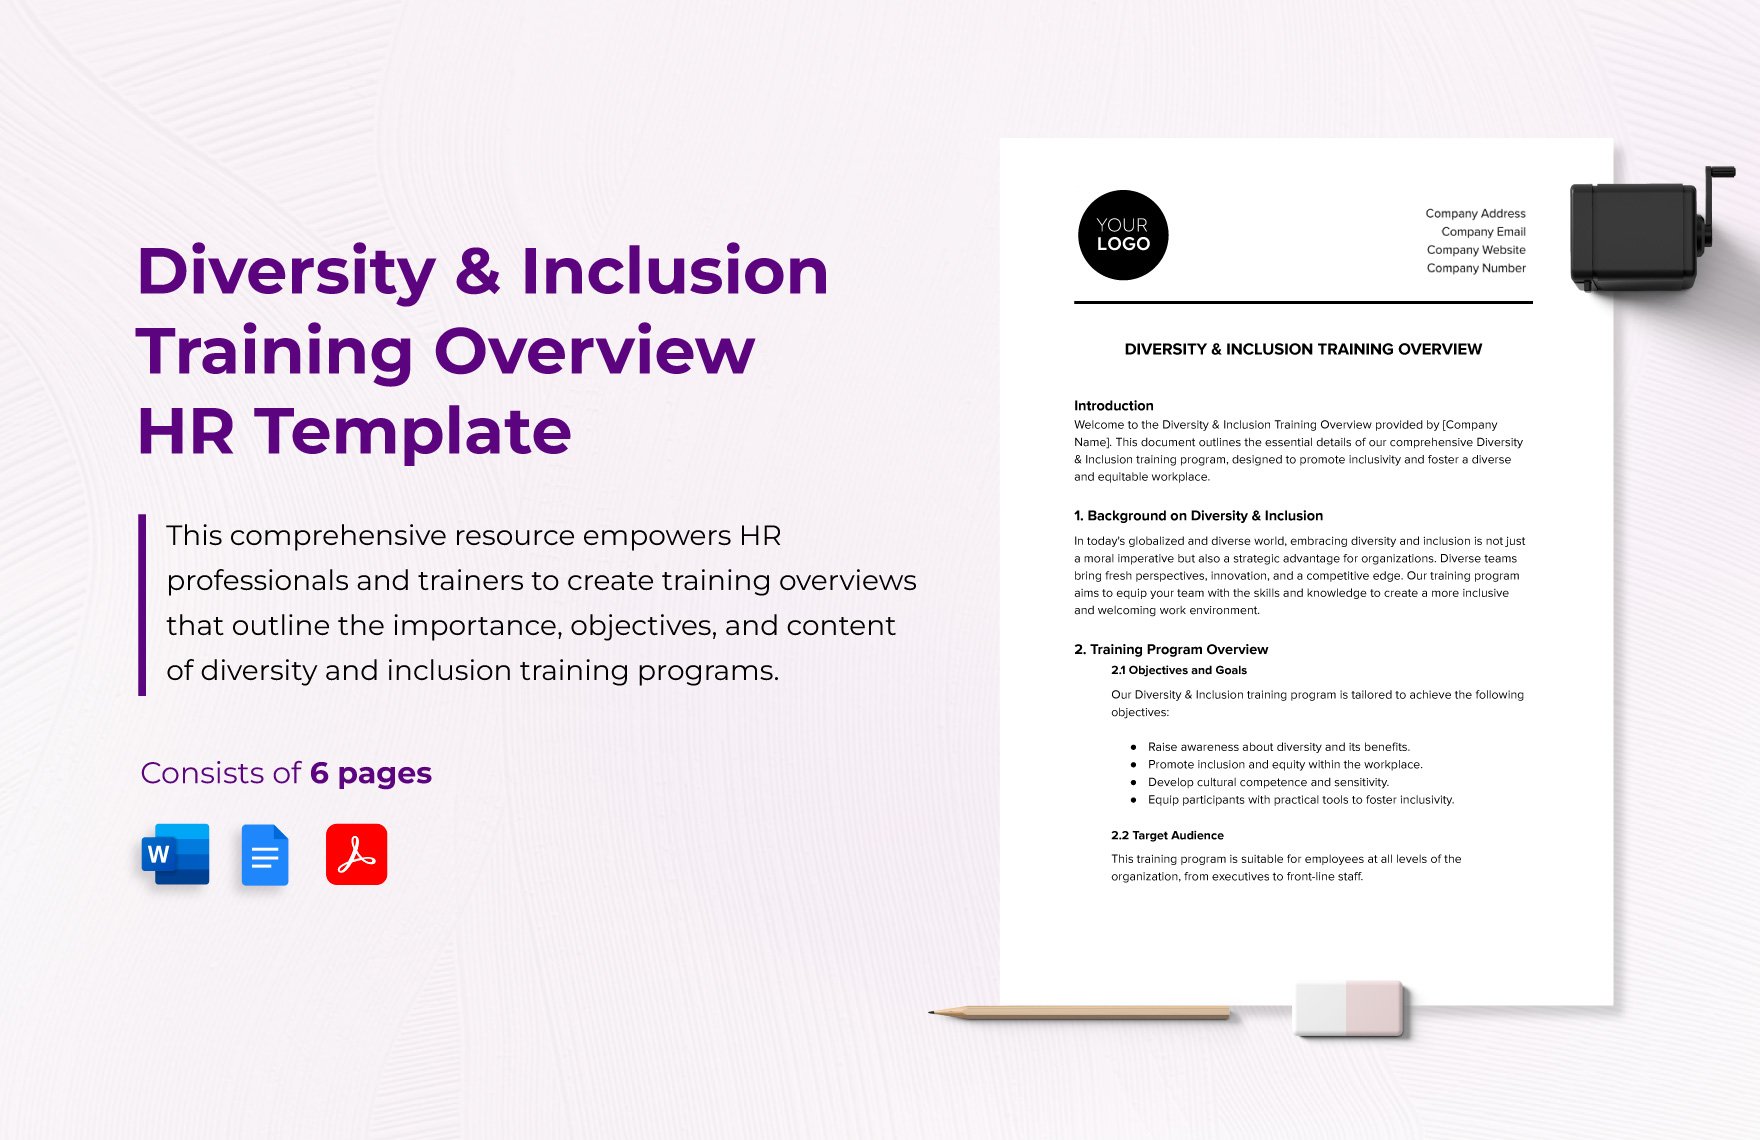 Diversity & Inclusion Training Overview HR Template